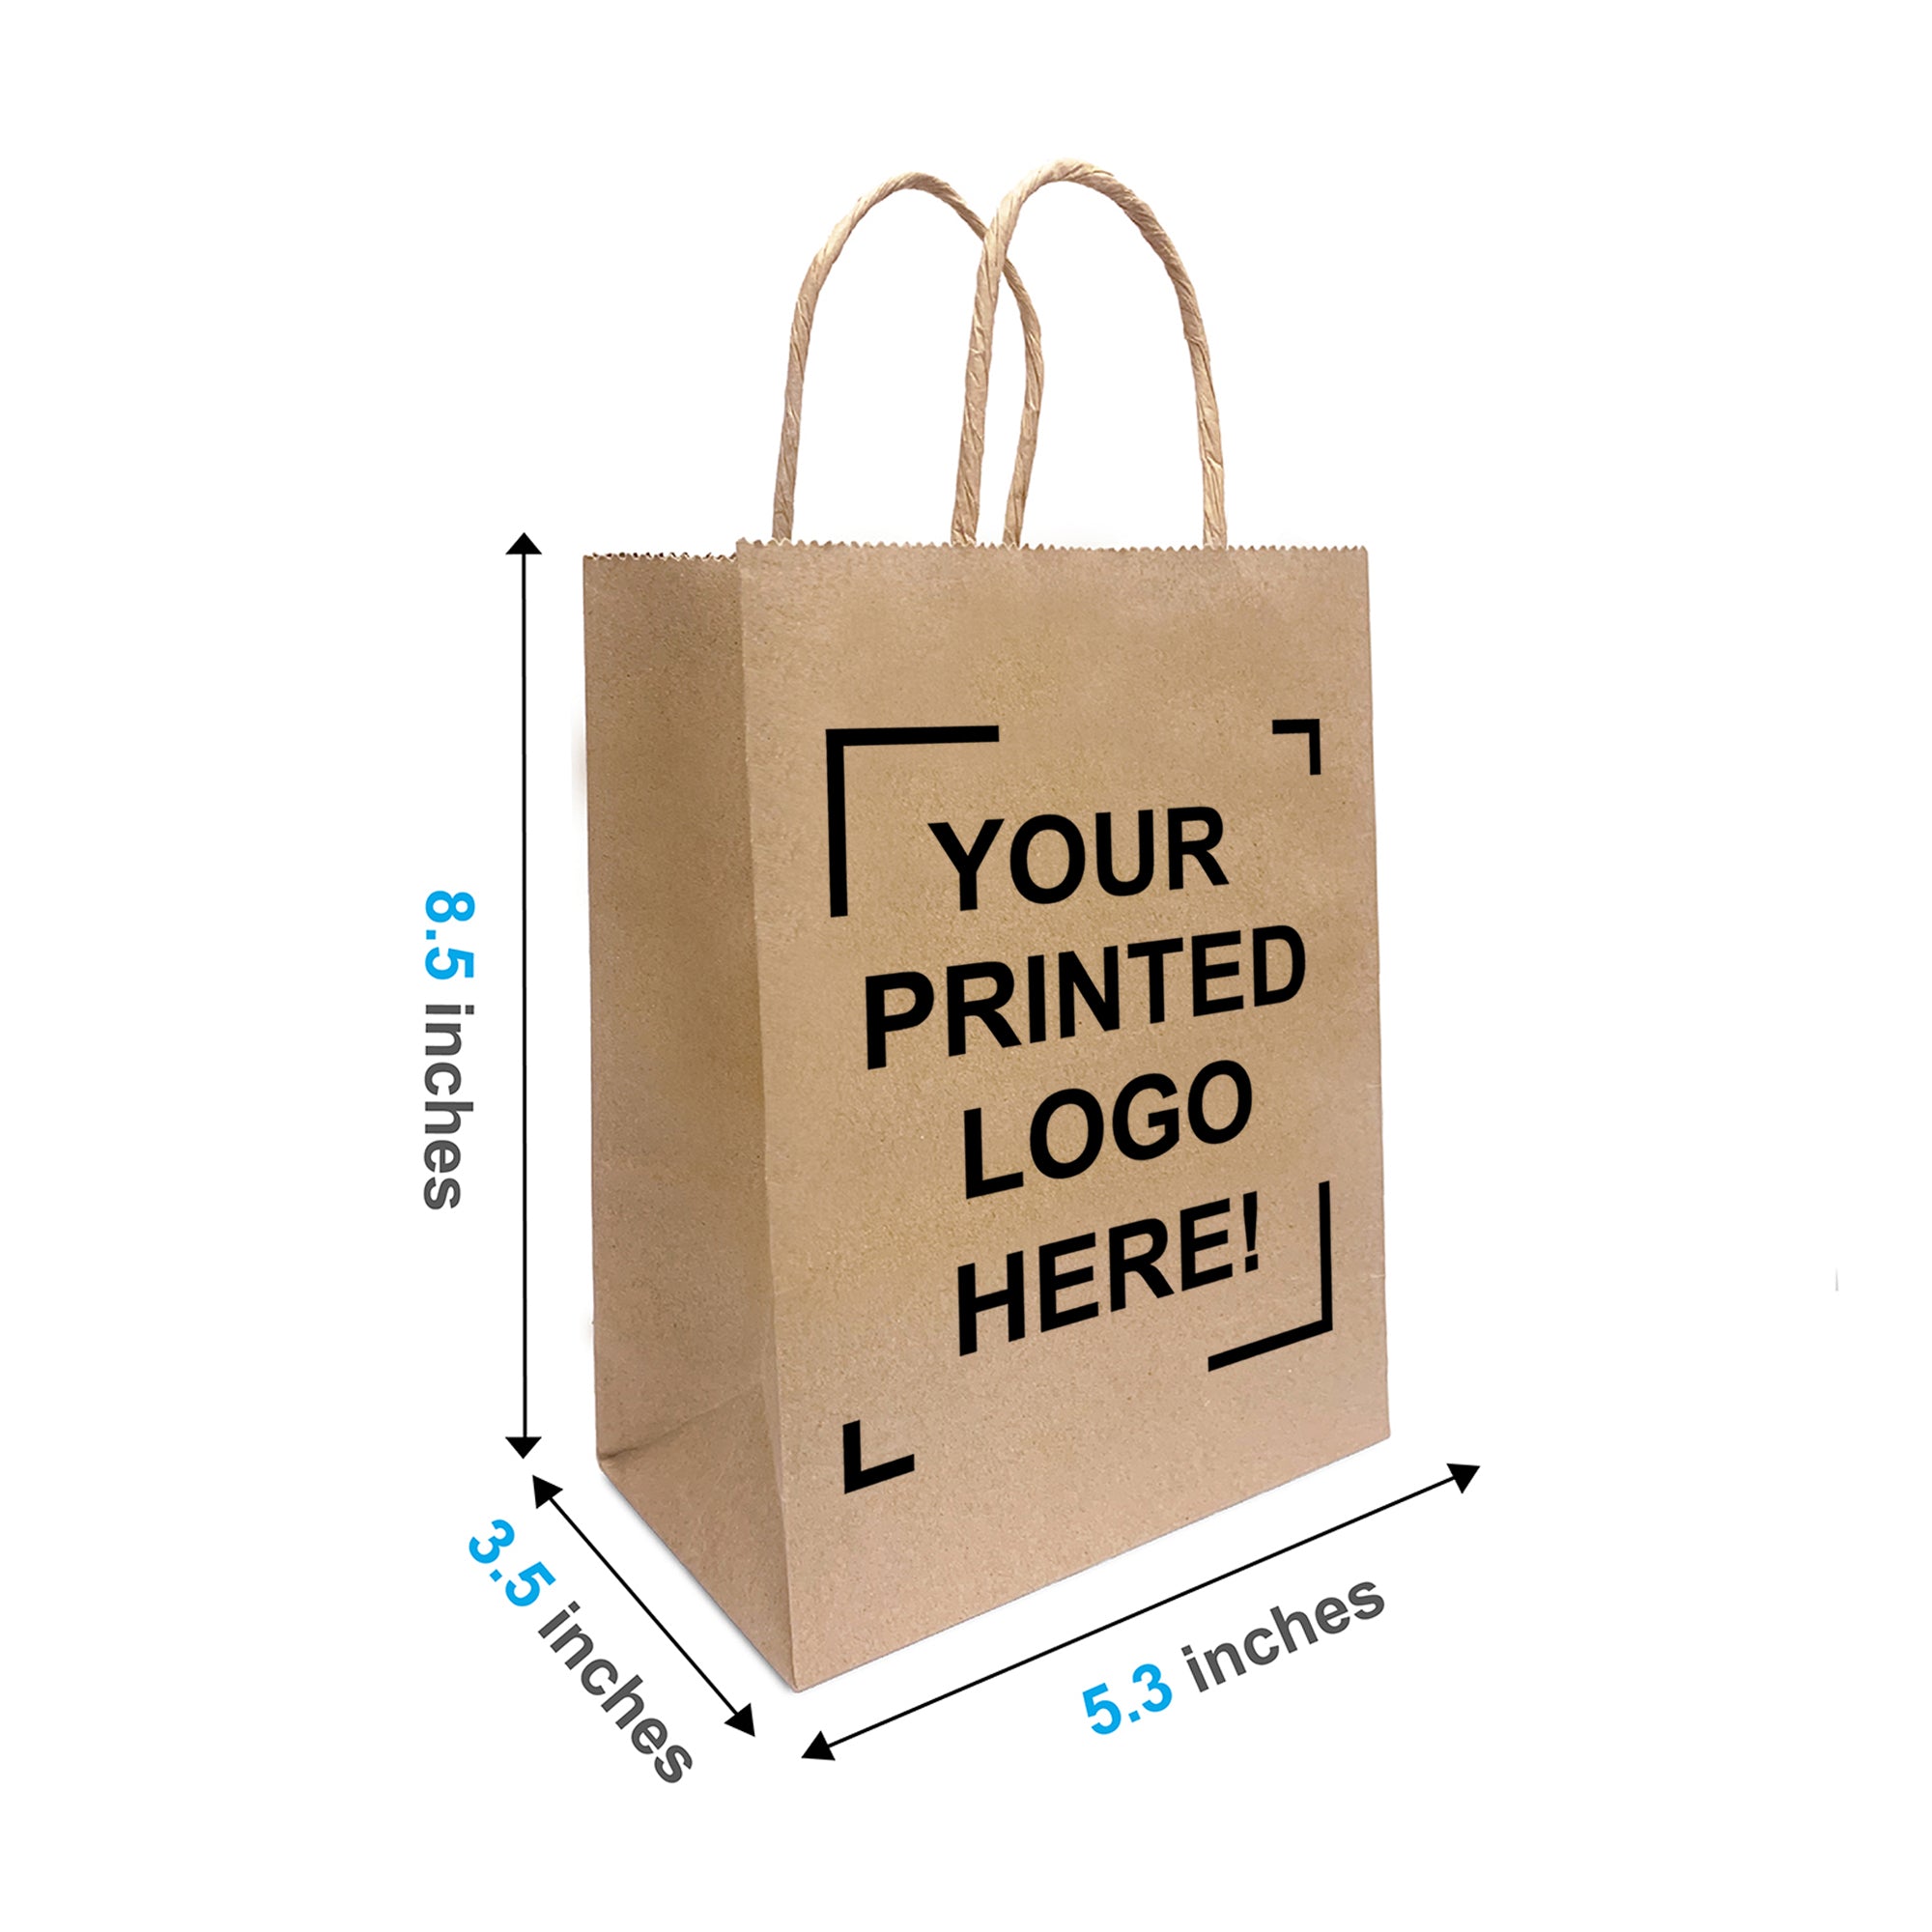 Custom Printed Plastic Bags for Promotions, Packaging and Shipping Supplies  | Aplasticbag.com | APlasticBag.com